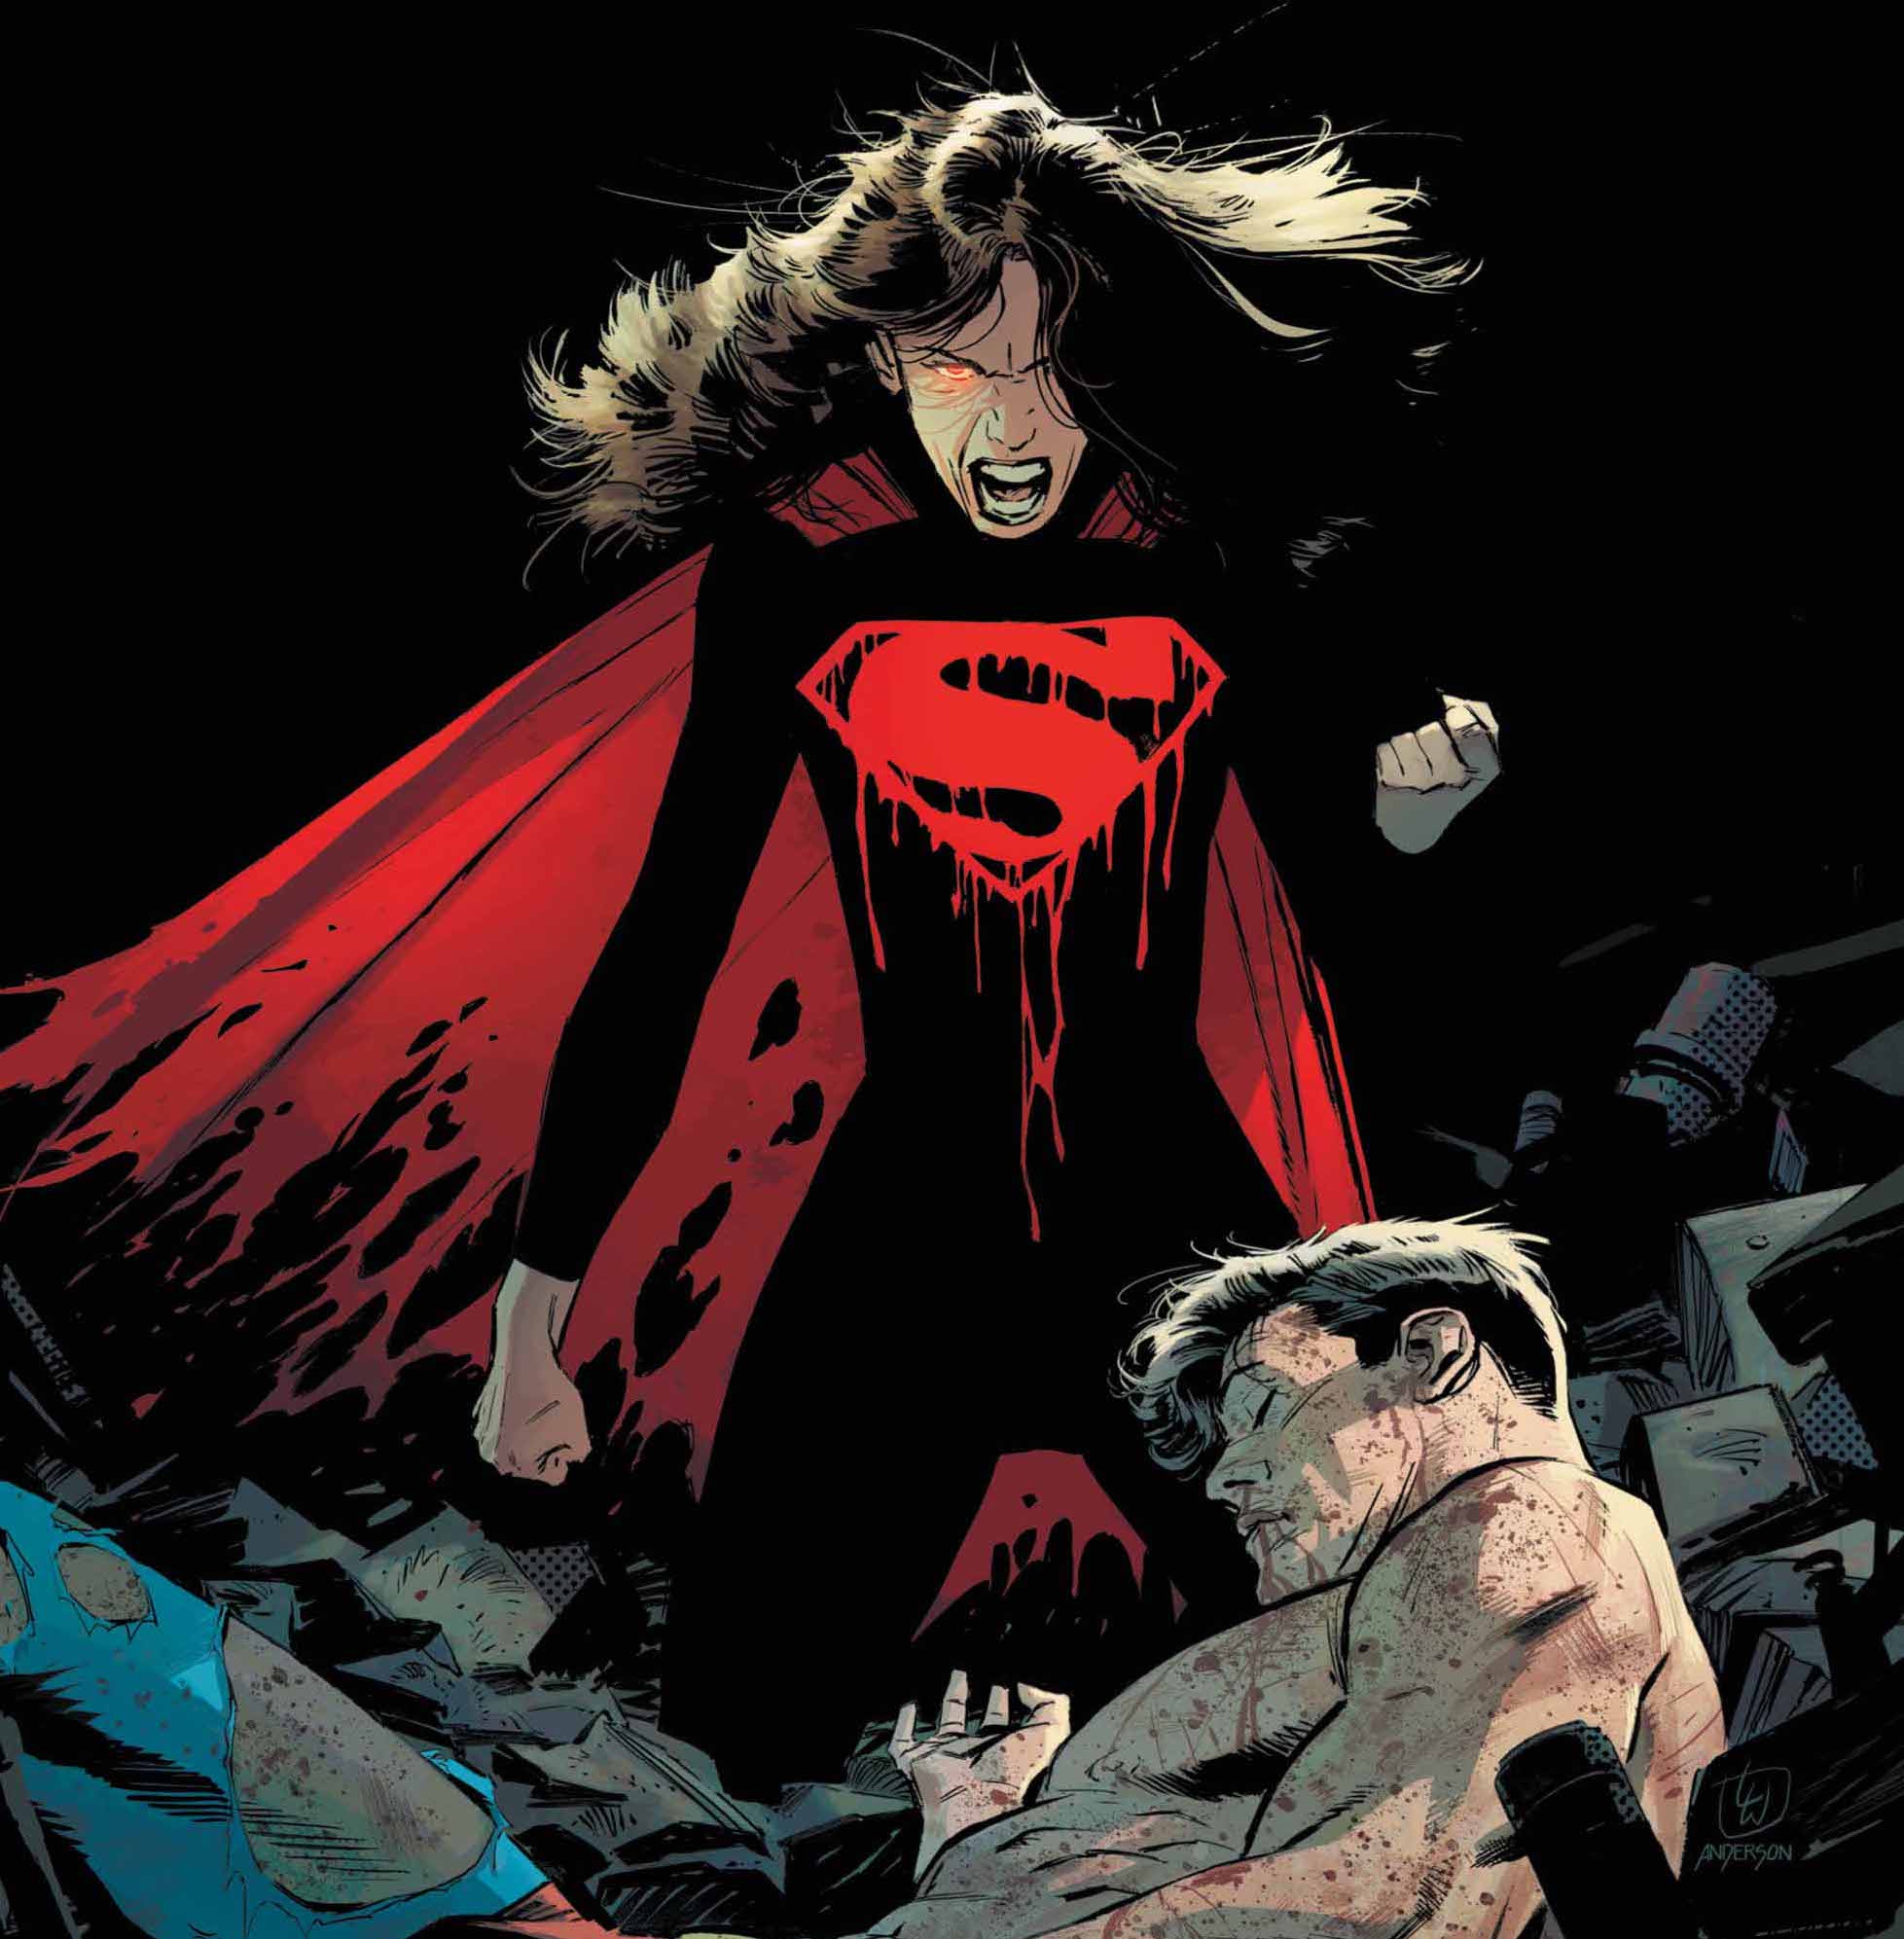 Tales from the Dark Multiverse: The Death of Superman #1 Review